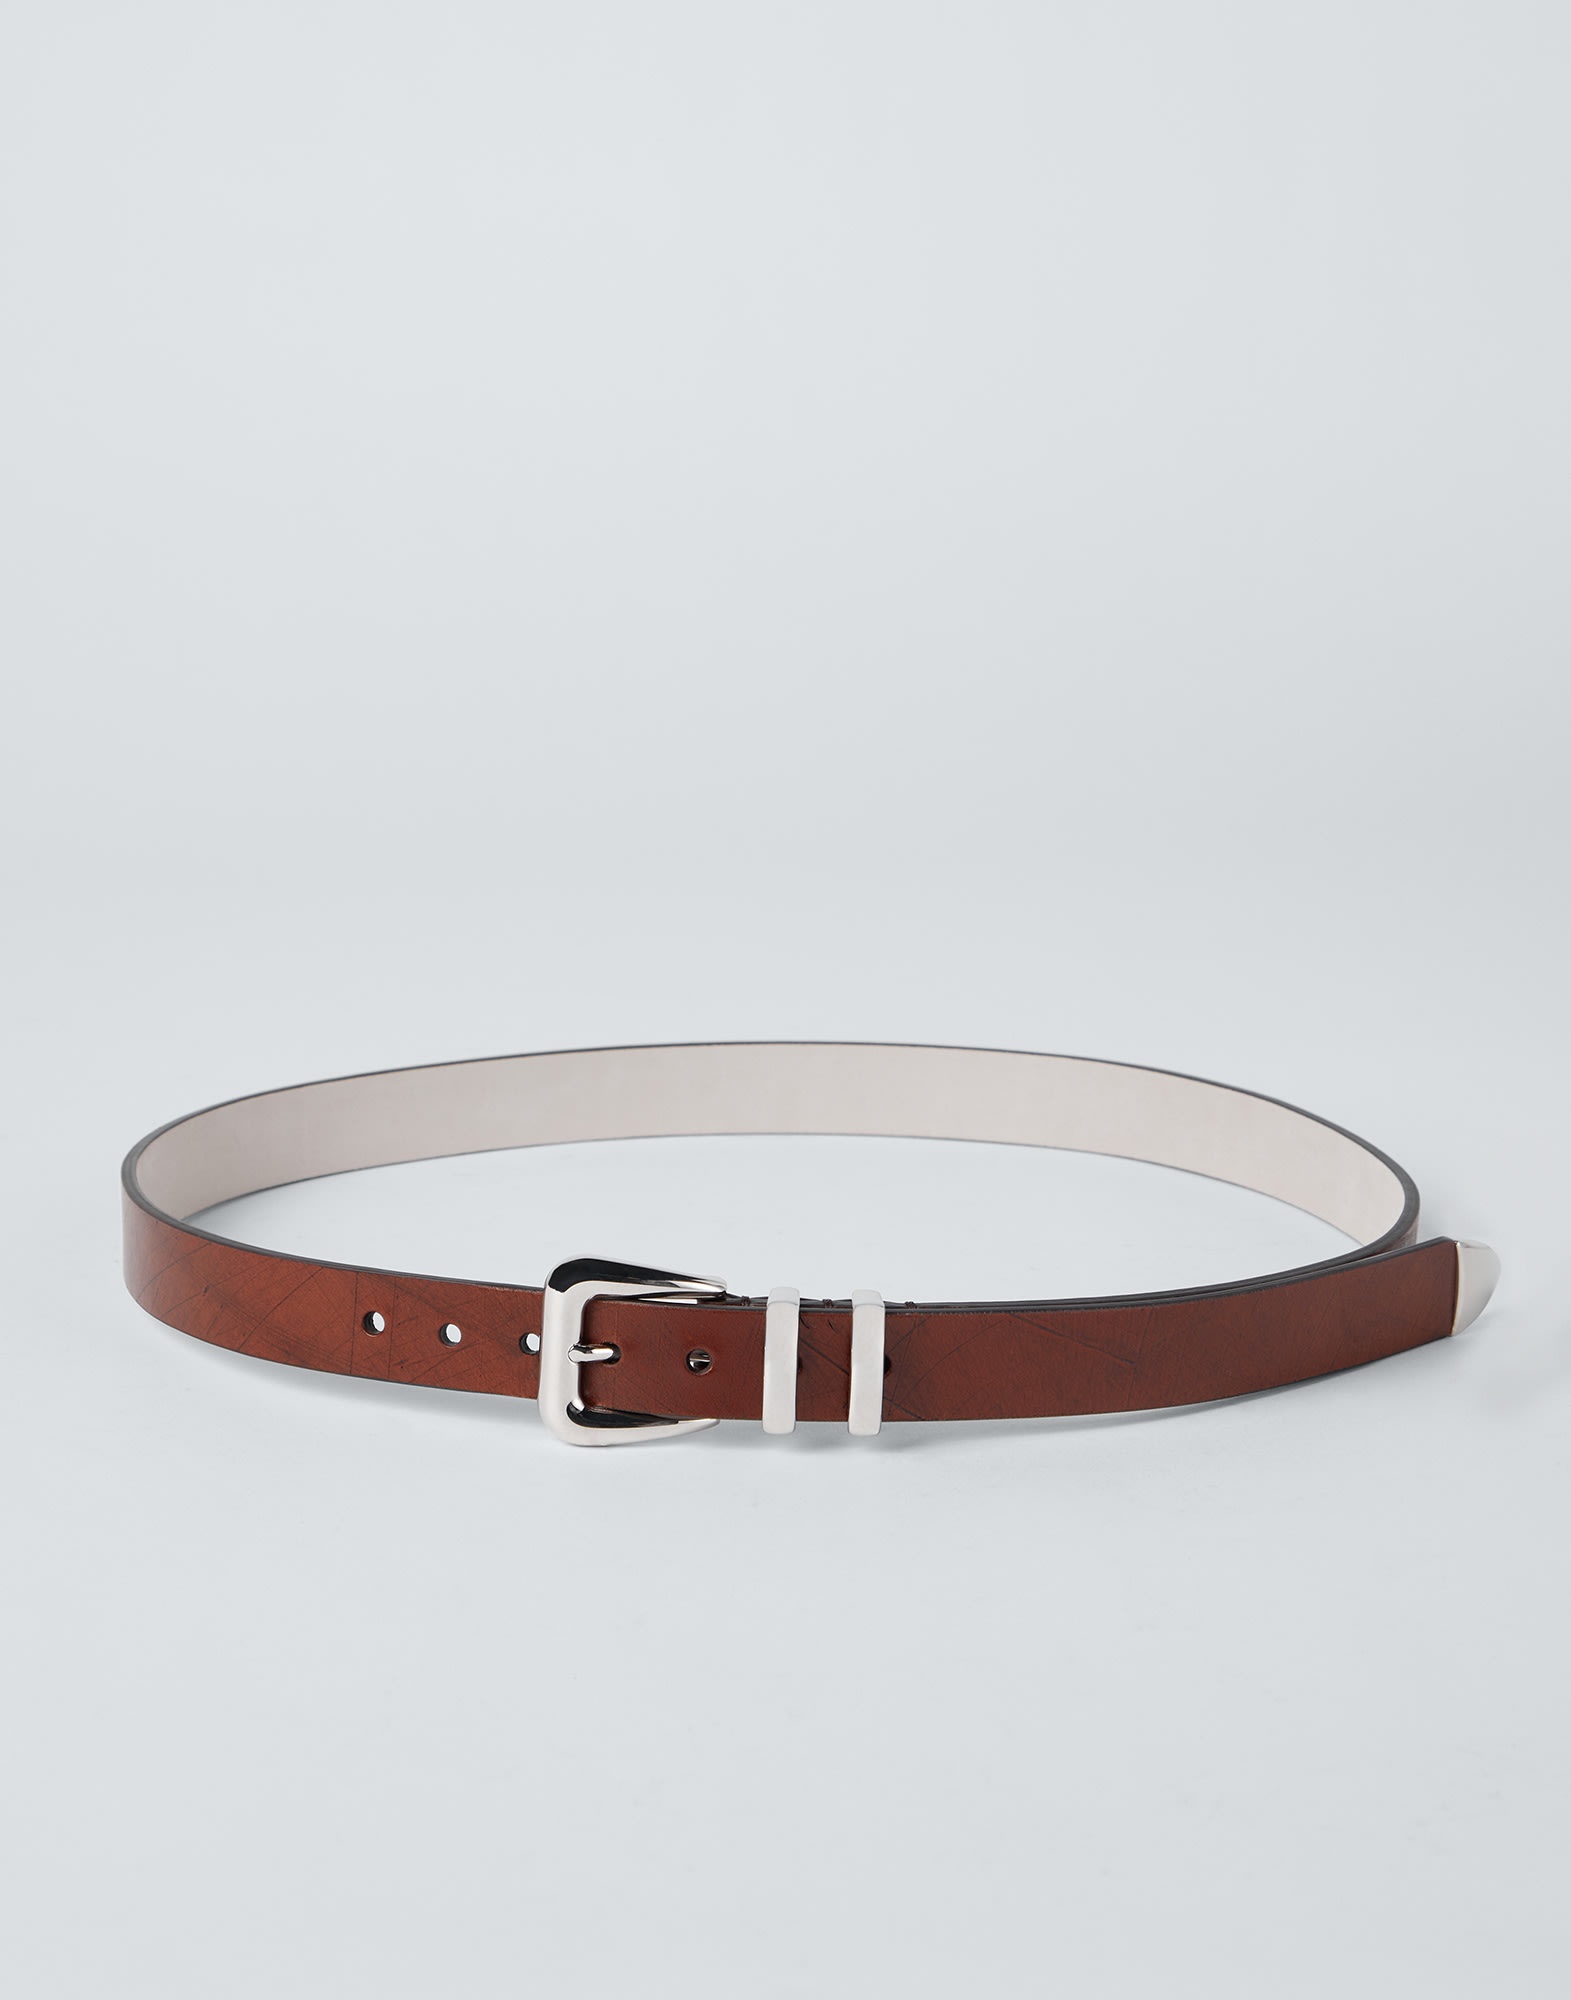 Etched leather belt with double keeper and tip - 1